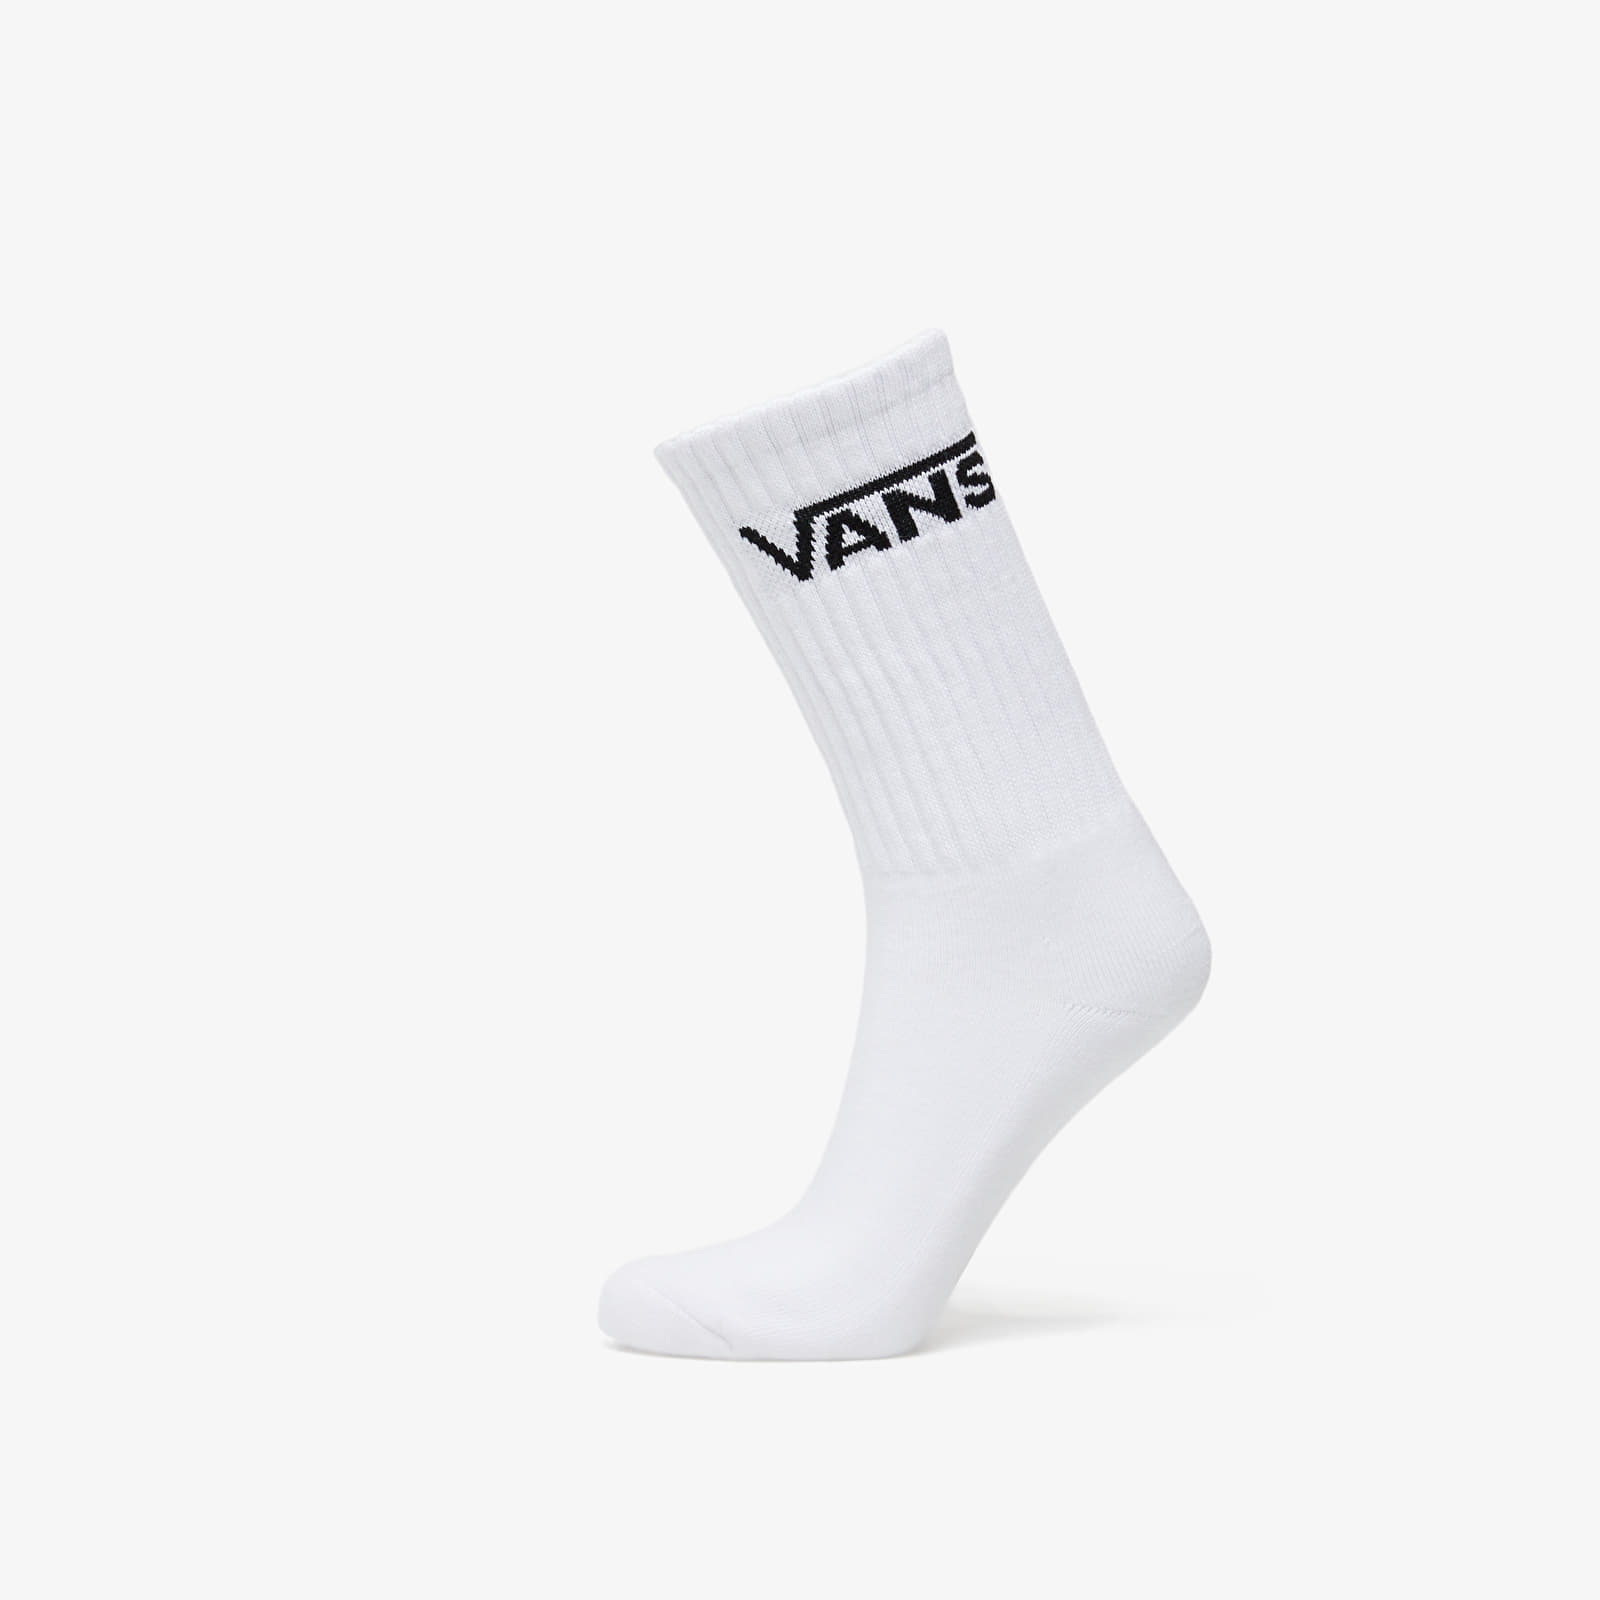 Chaussettes Vans Classic Crew Socks 3-Pack Black/ Checkerboard